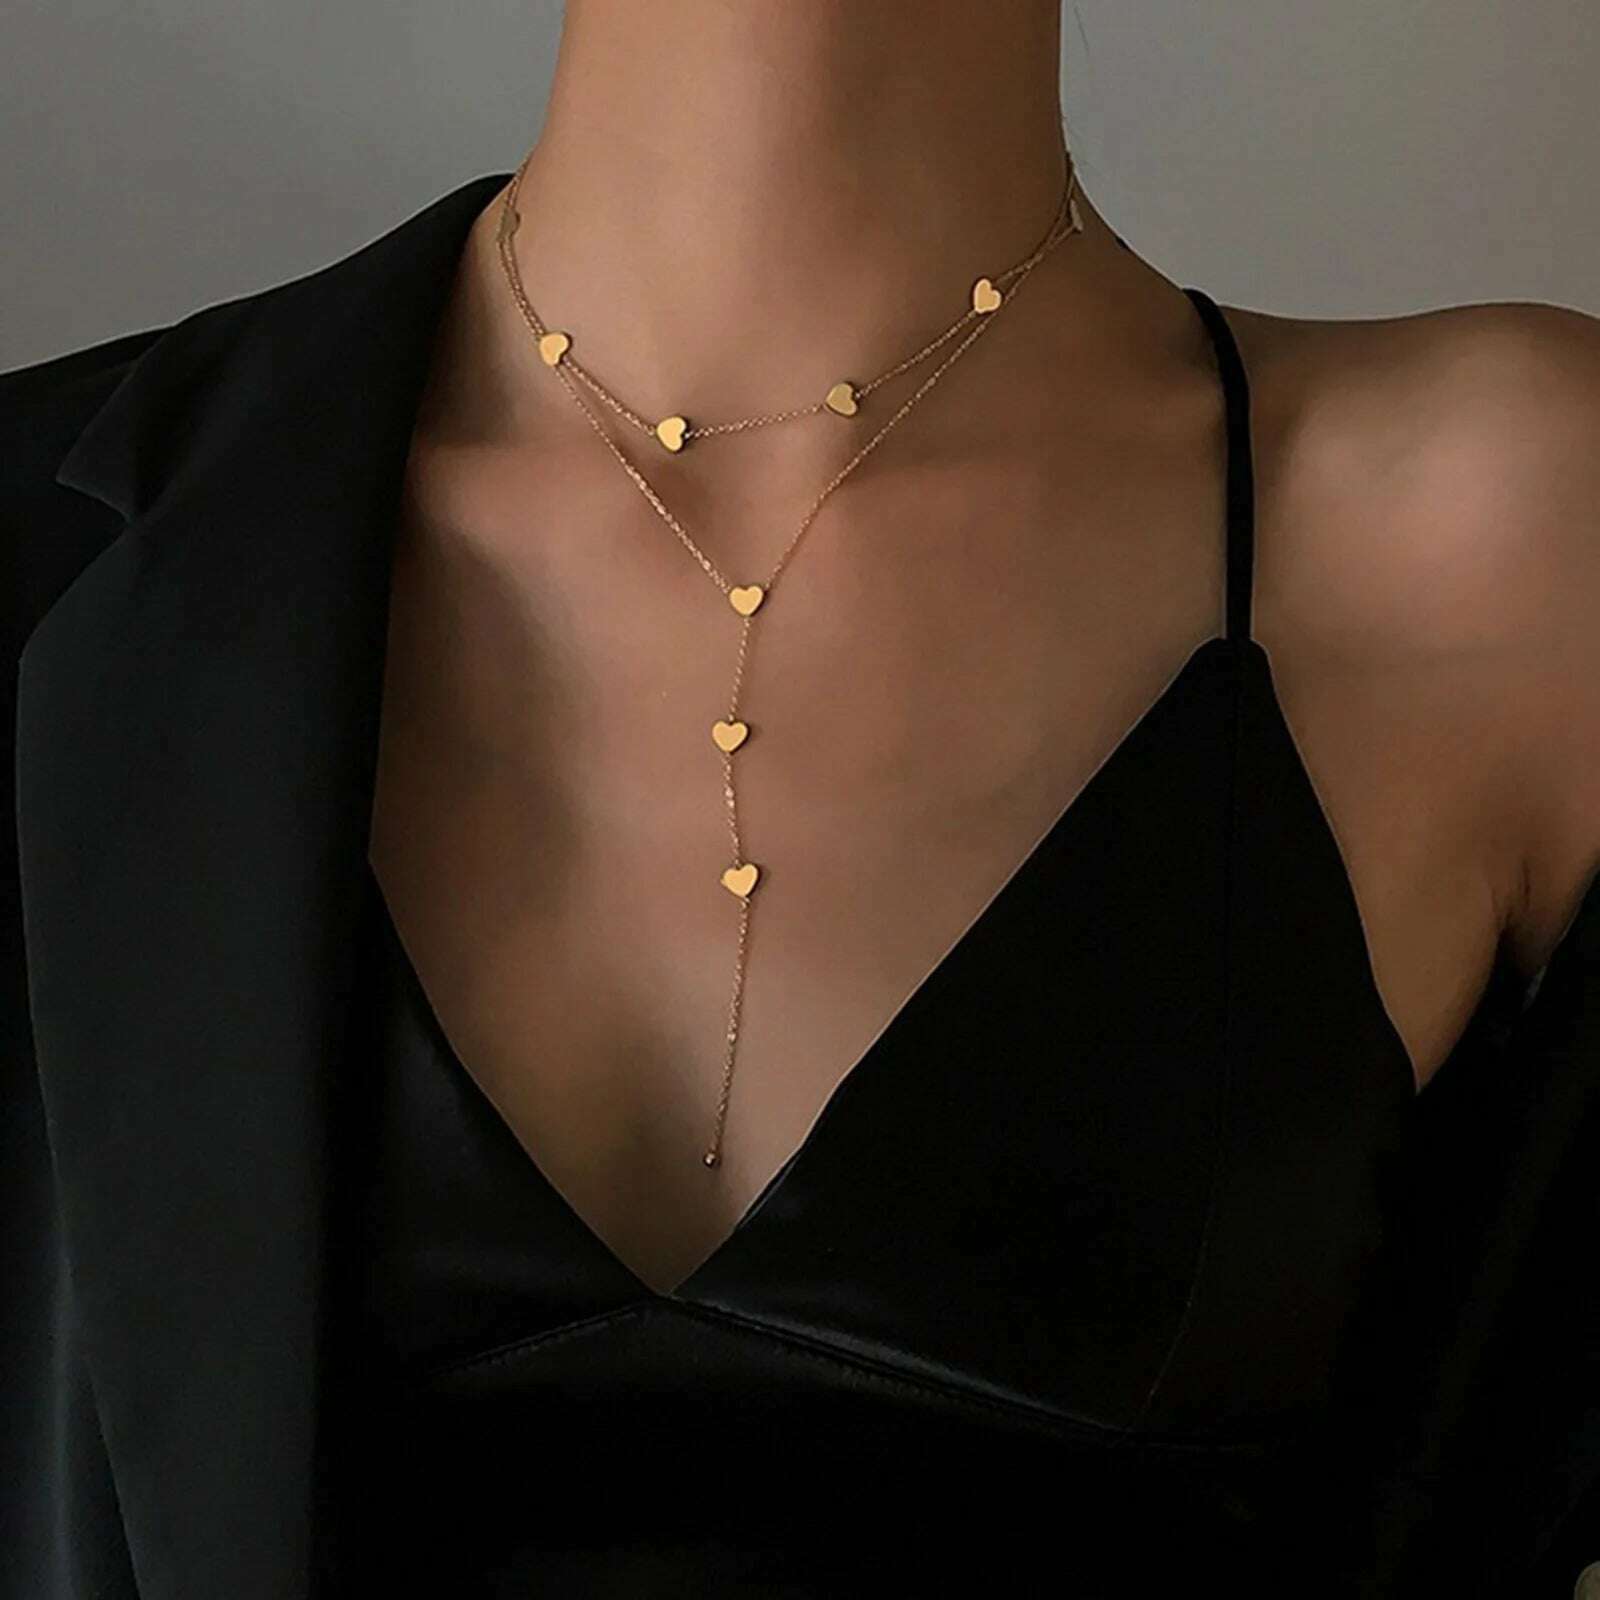 KIMLUD, Vnox Layering Necklaces for Women, Gold Color Sexy Y Necklaces, Stainless Steel Rosary Chain, Layered Beads Choker, KIMLUD Women's Clothes